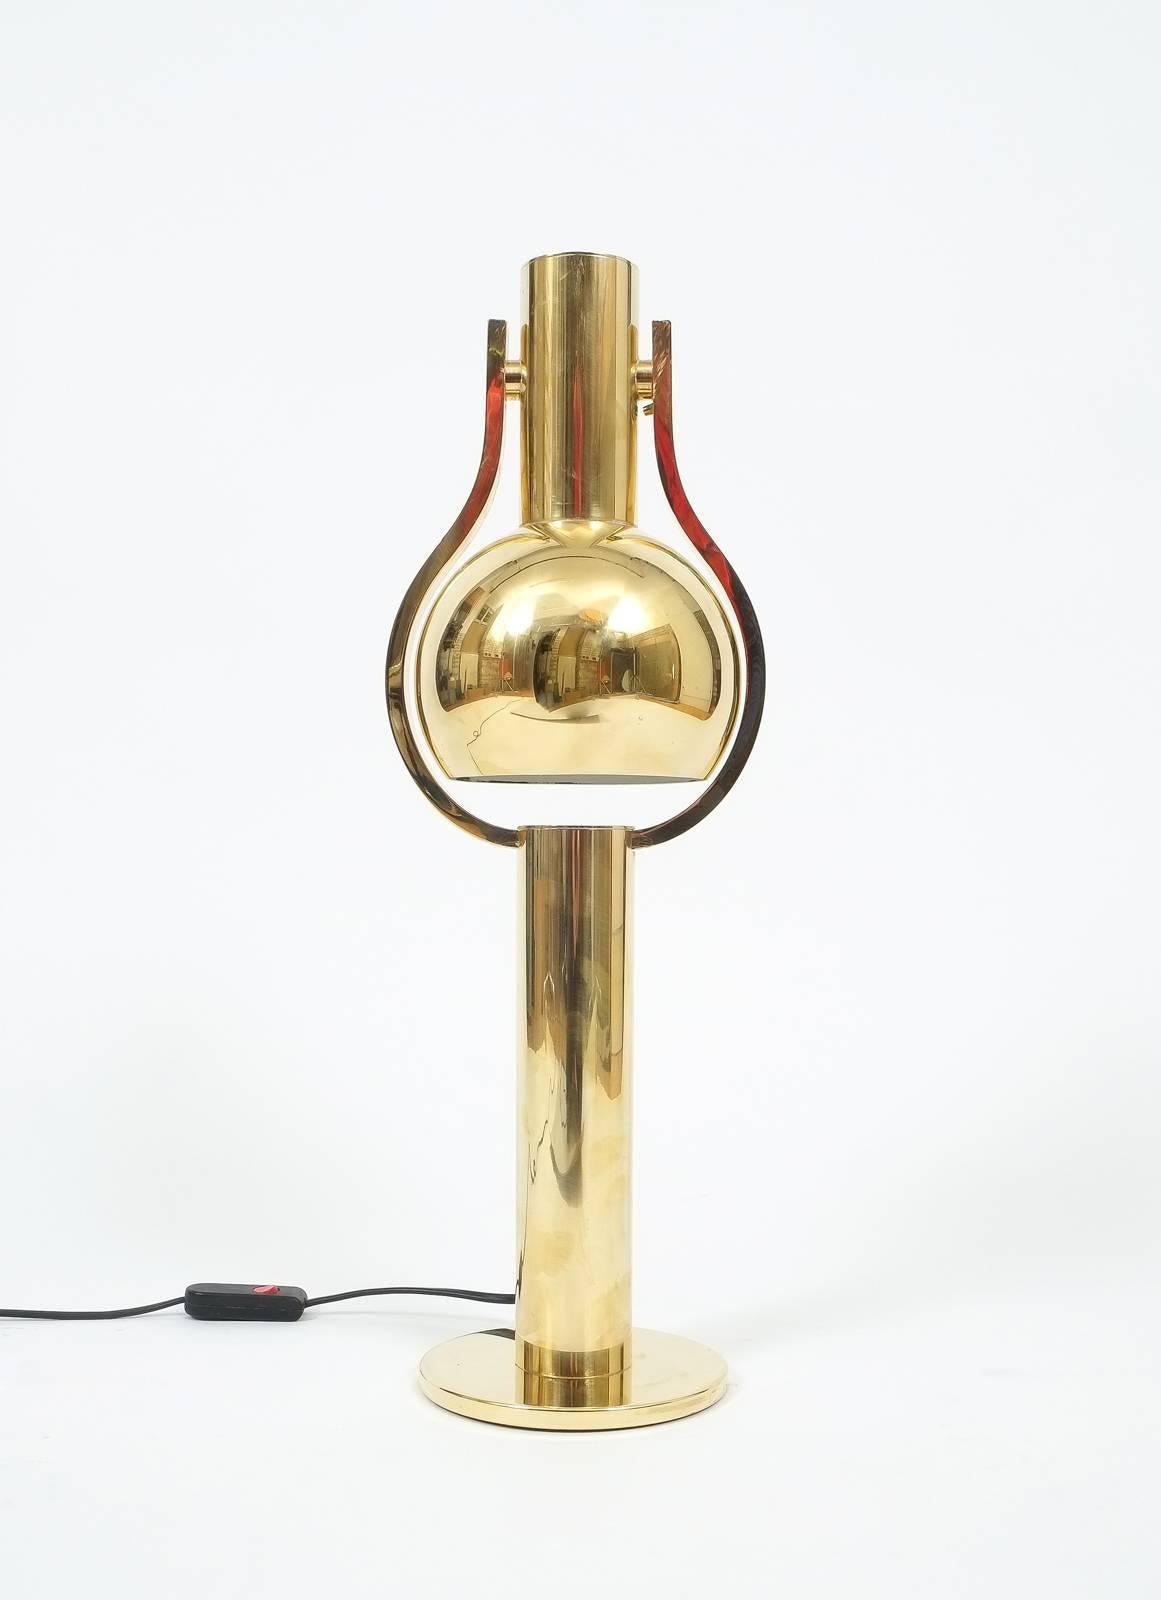 Pair of articulate refurbished brass desk lamps by Staff, Germany, 1970. Shiny pair of articulate brass table lamps fully comprised of brass; these lights have been gently refurbished and polished to its original shiny state. Each lamp holds one e27